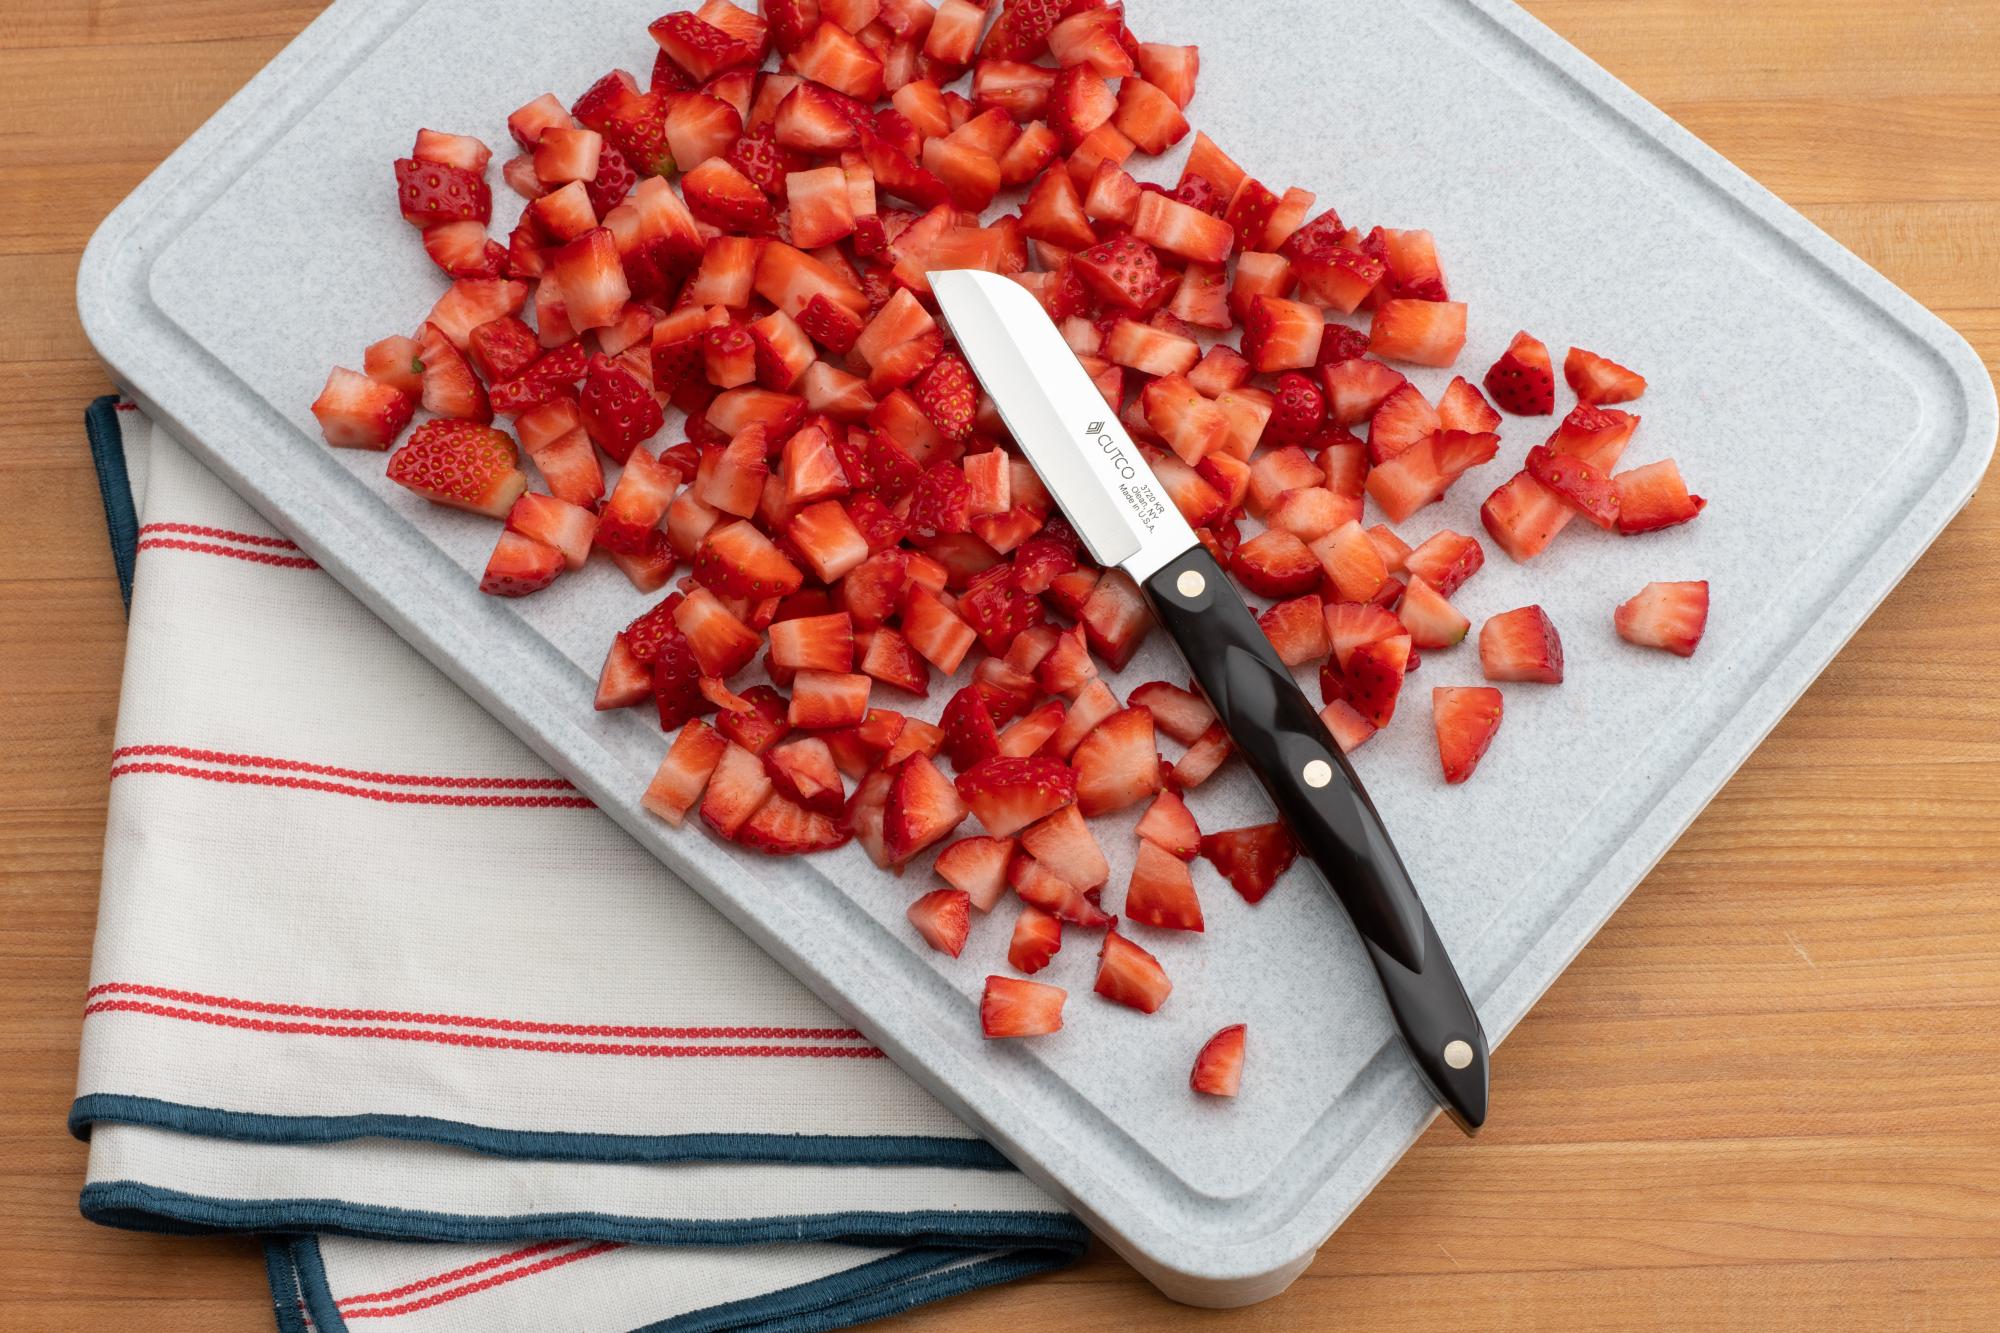 Diced strawberries with a Santoku-Style Paring Knife.